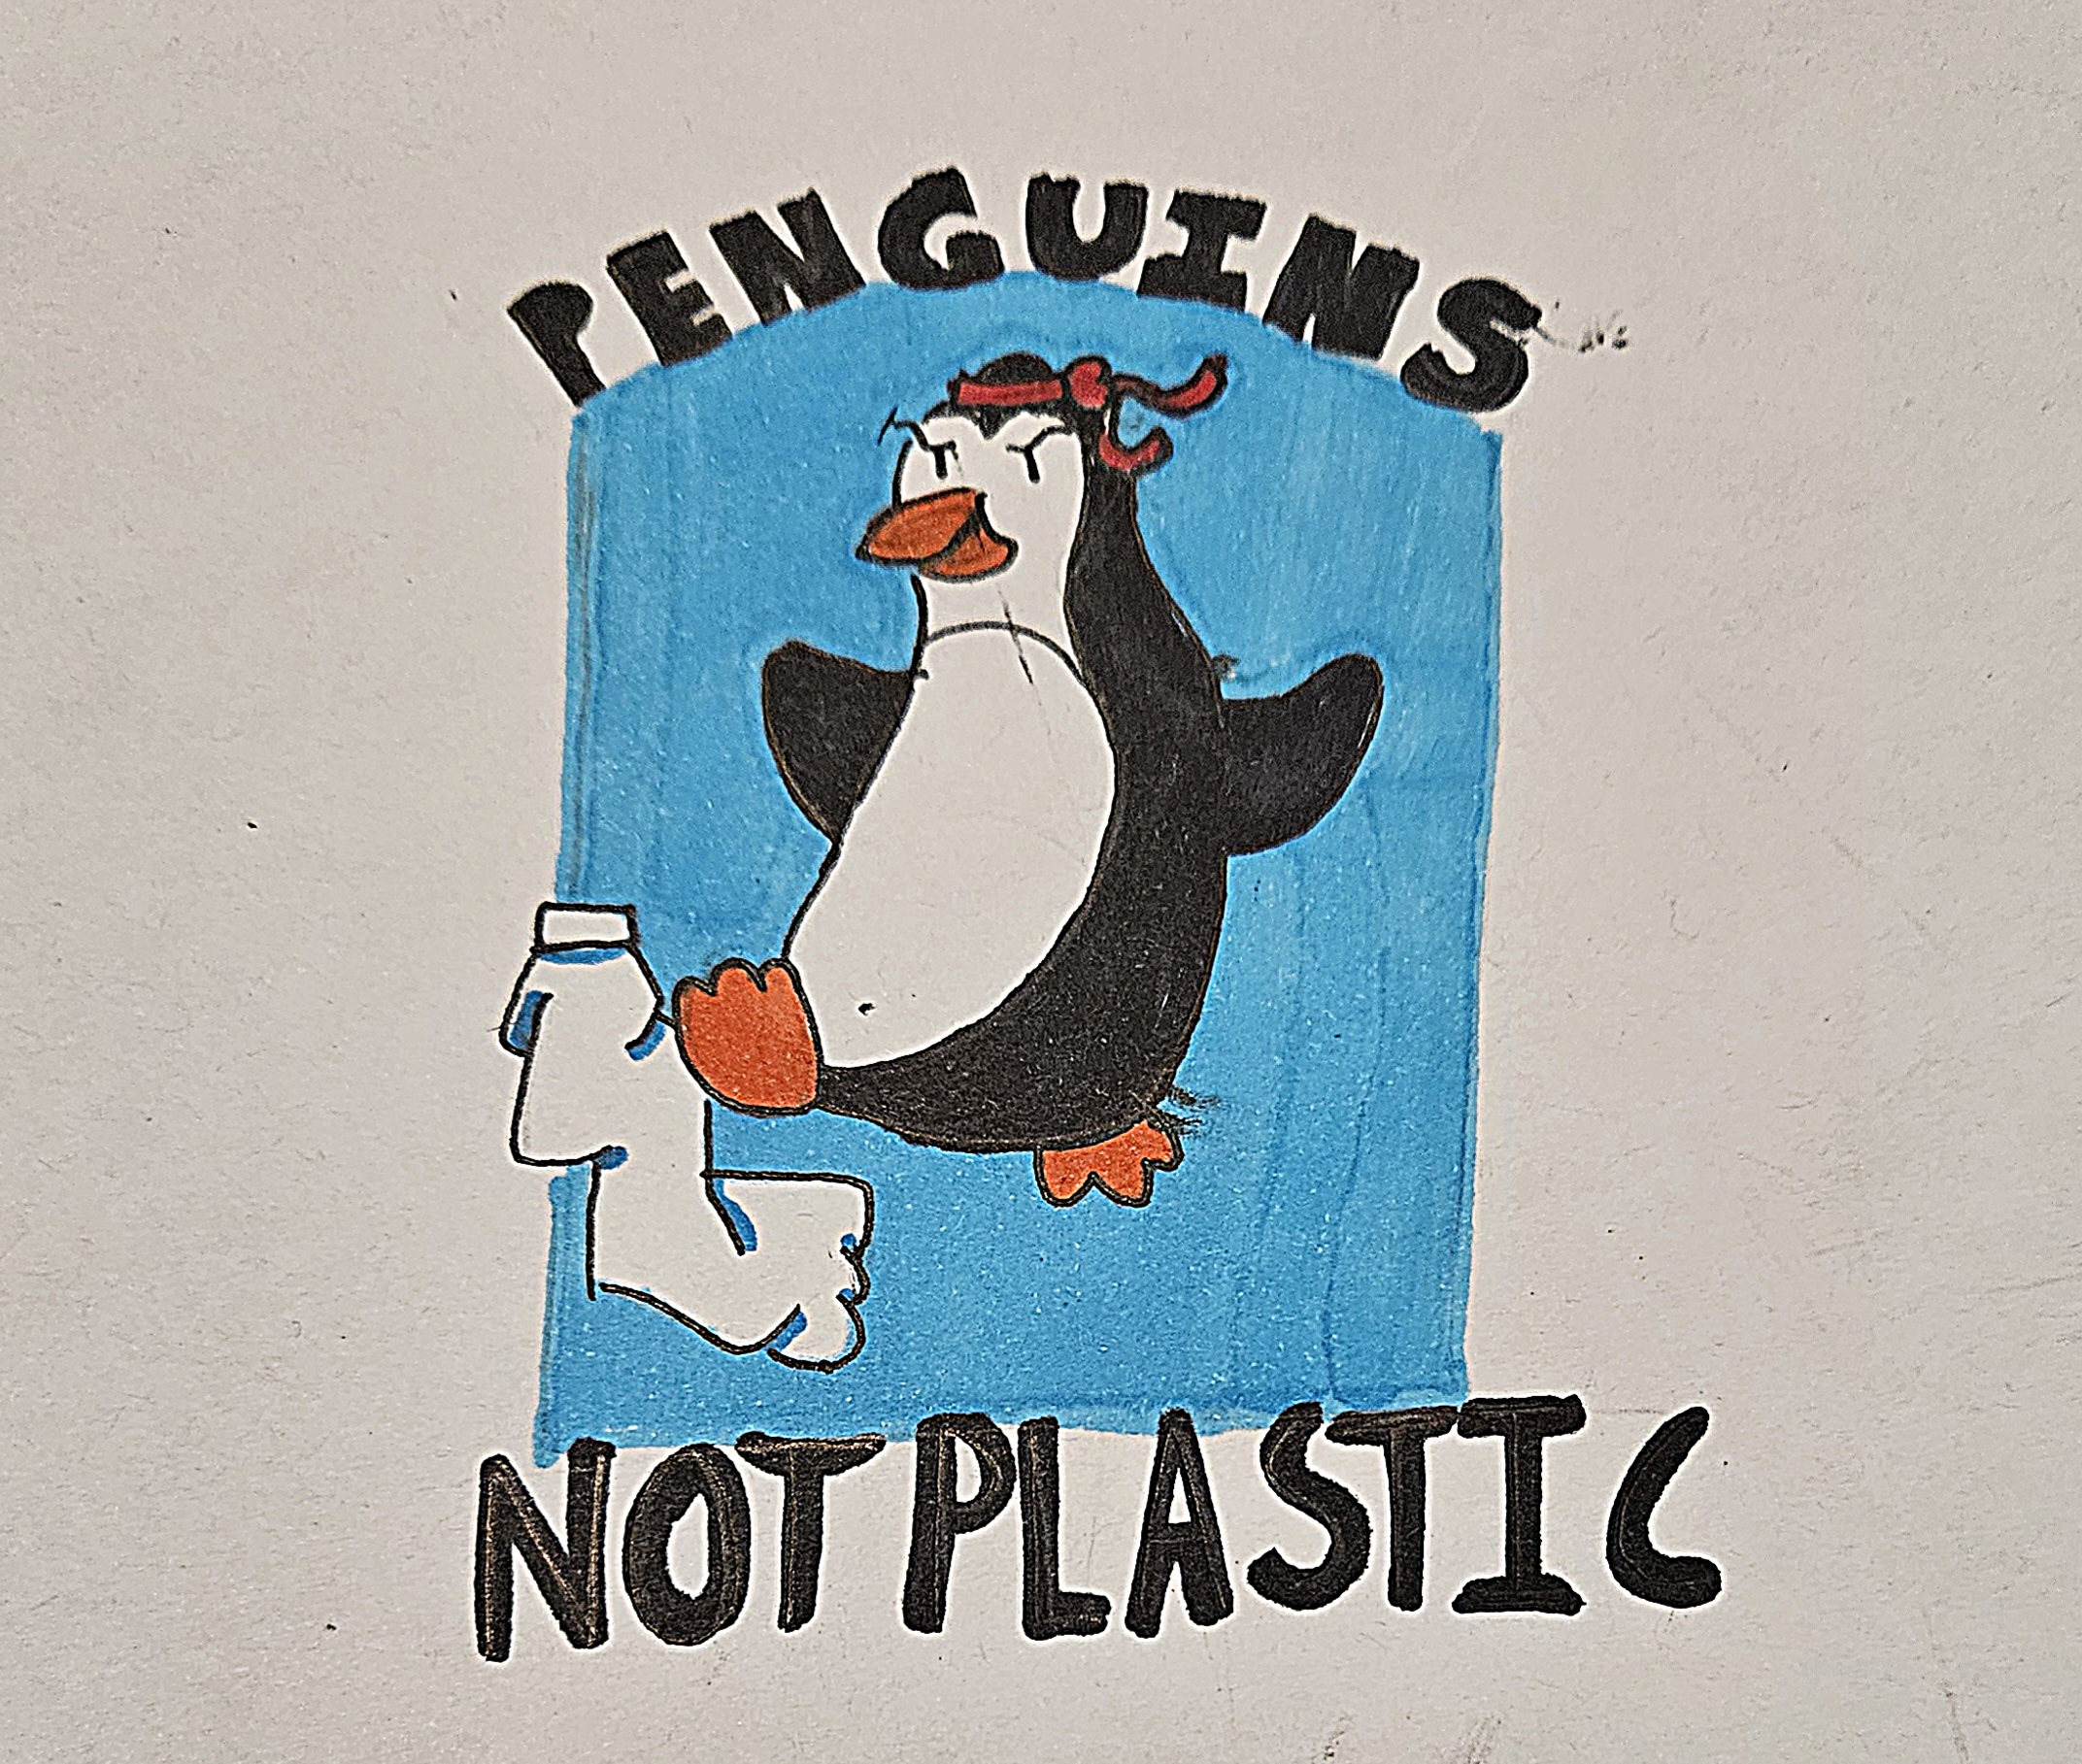 Child’s drawing featuring the slogan ‘Penguins not plastic’ illustrating a penguin with a red karate headband kicking a plastic water bottle